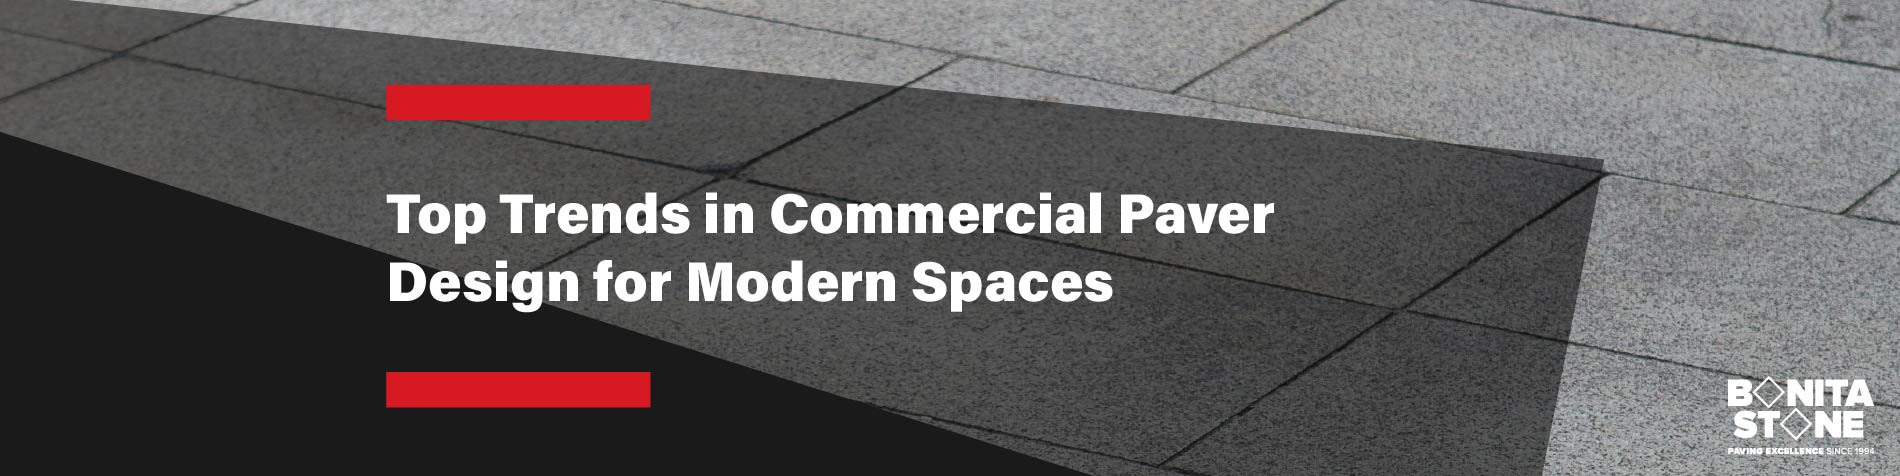 top-trends-in-commercial-pave-design-for-modern-spaces-banner